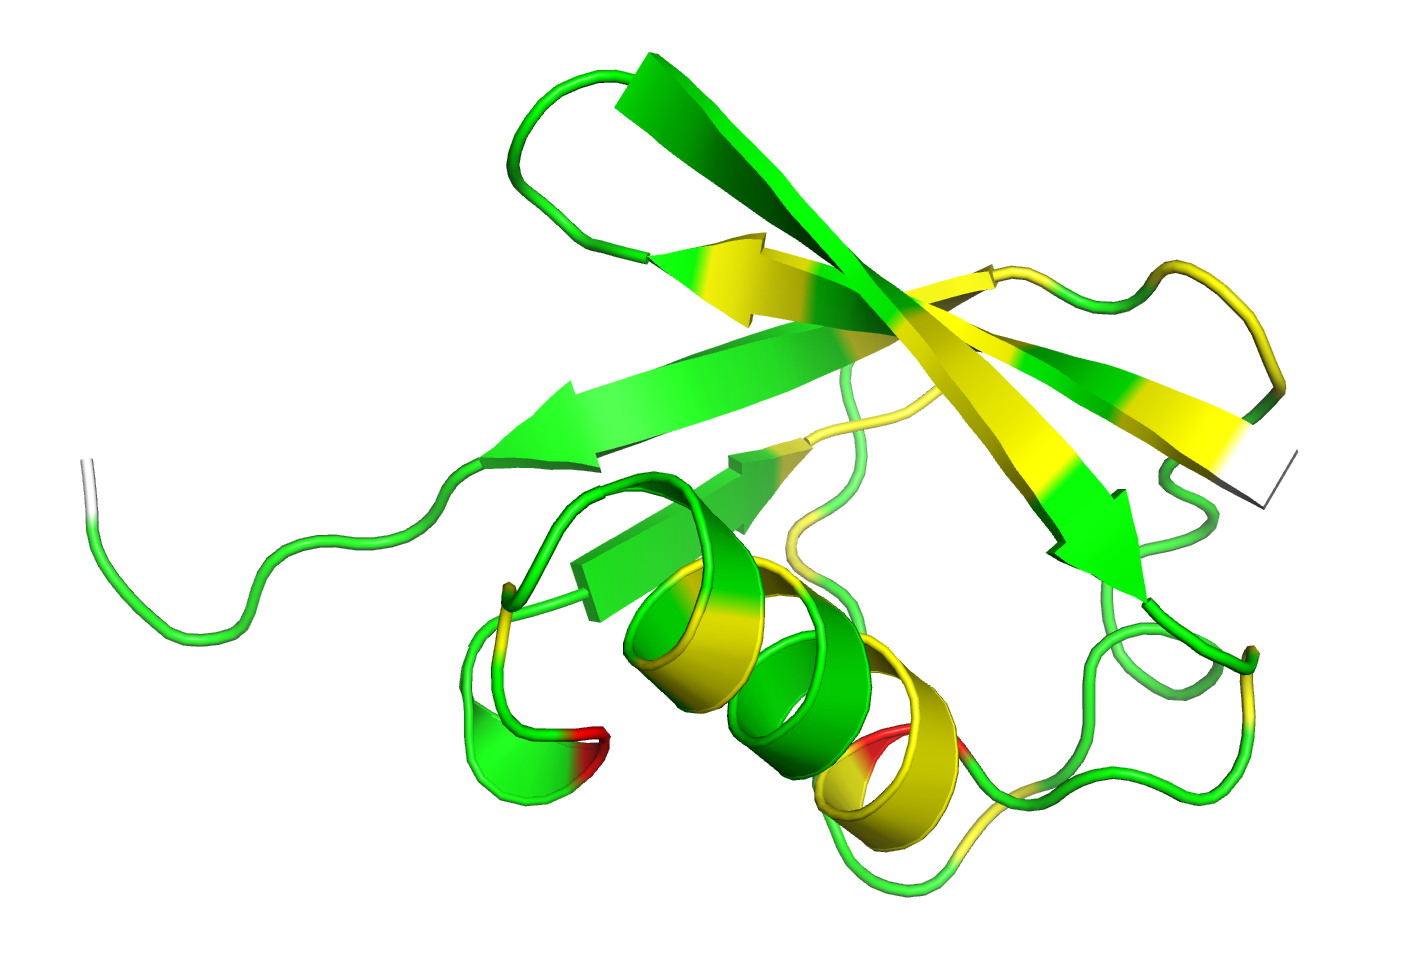 Ubiquitin (protein) PDB id: 1D3Z | Validación visual en PyMOL con el plugin <a  class='active_link_w' href='https://pymolwiki.org/index.php/Cheshift' target='_blank'>Cheshift</a>